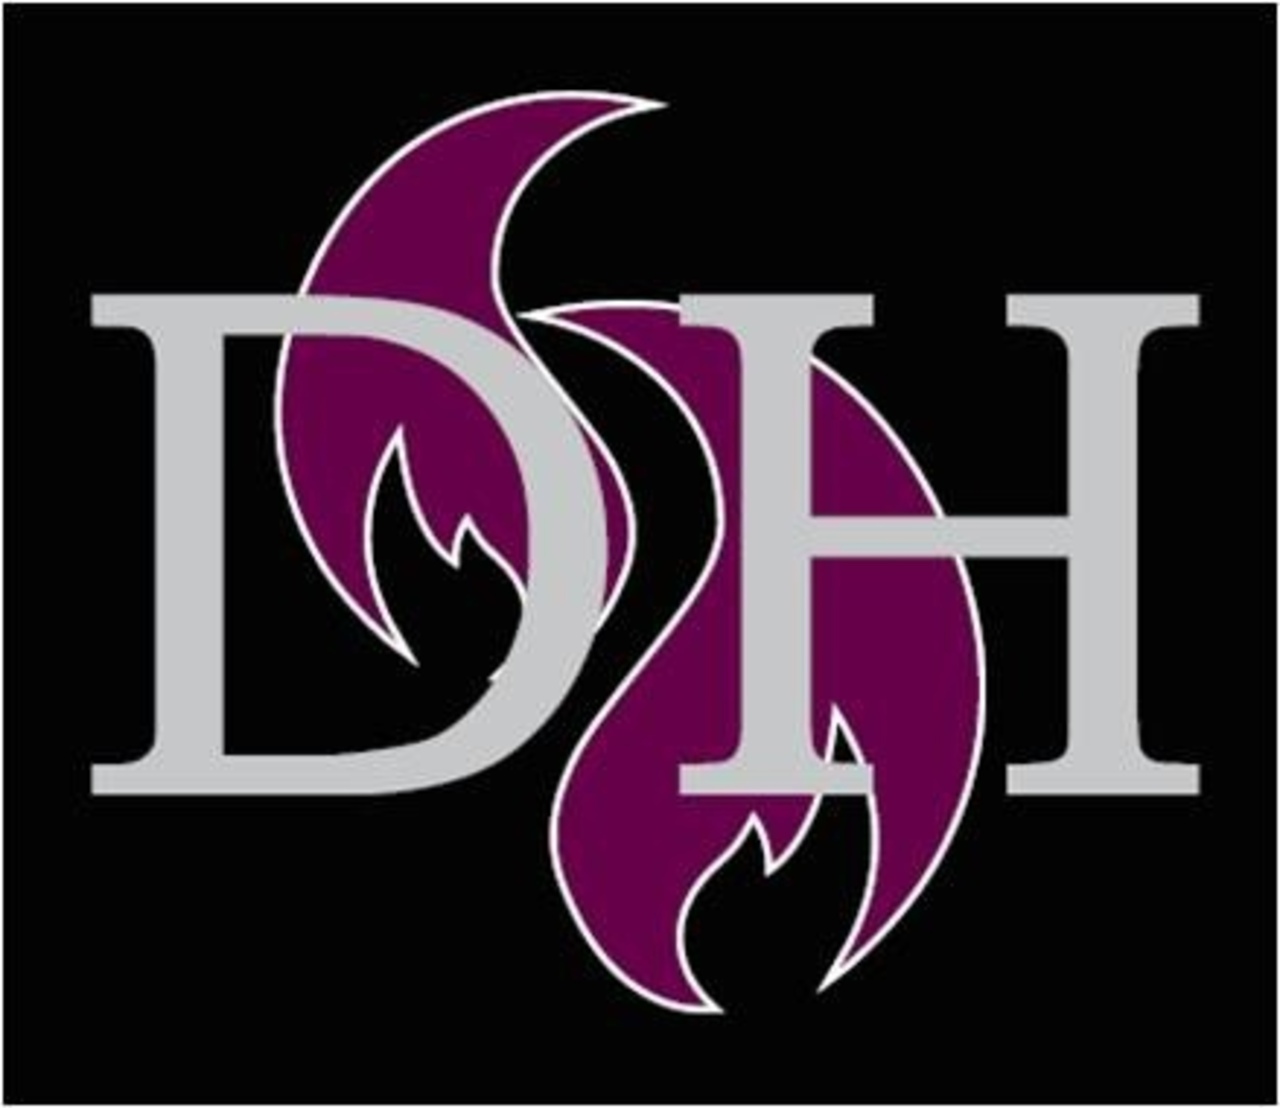 Dh Plumbing And Heating's logo